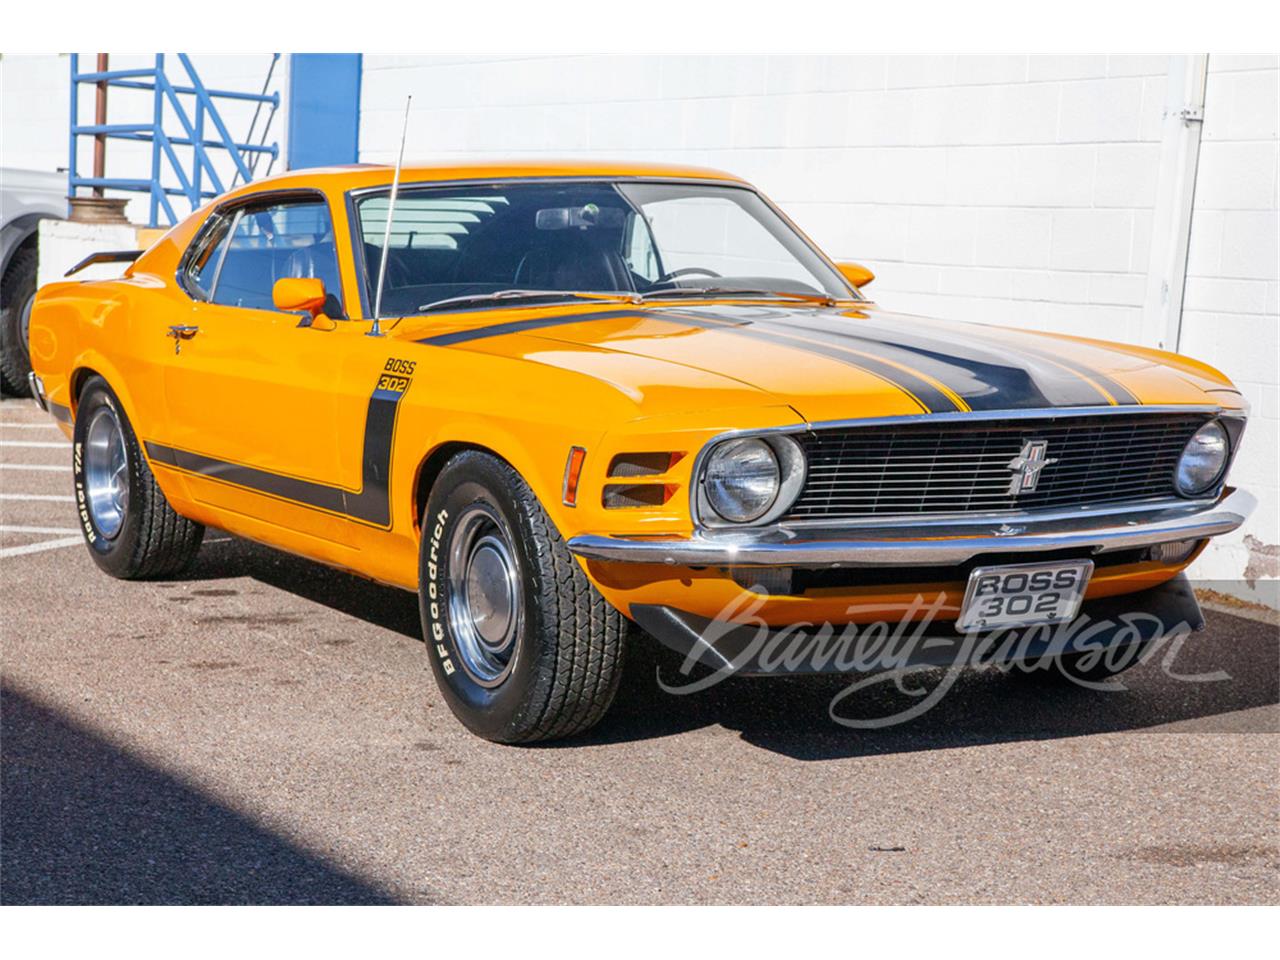 For Sale at Auction: 1970 Ford Mustang Boss 302 in Scottsdale, Arizona for sale in Scottsdale, AZ